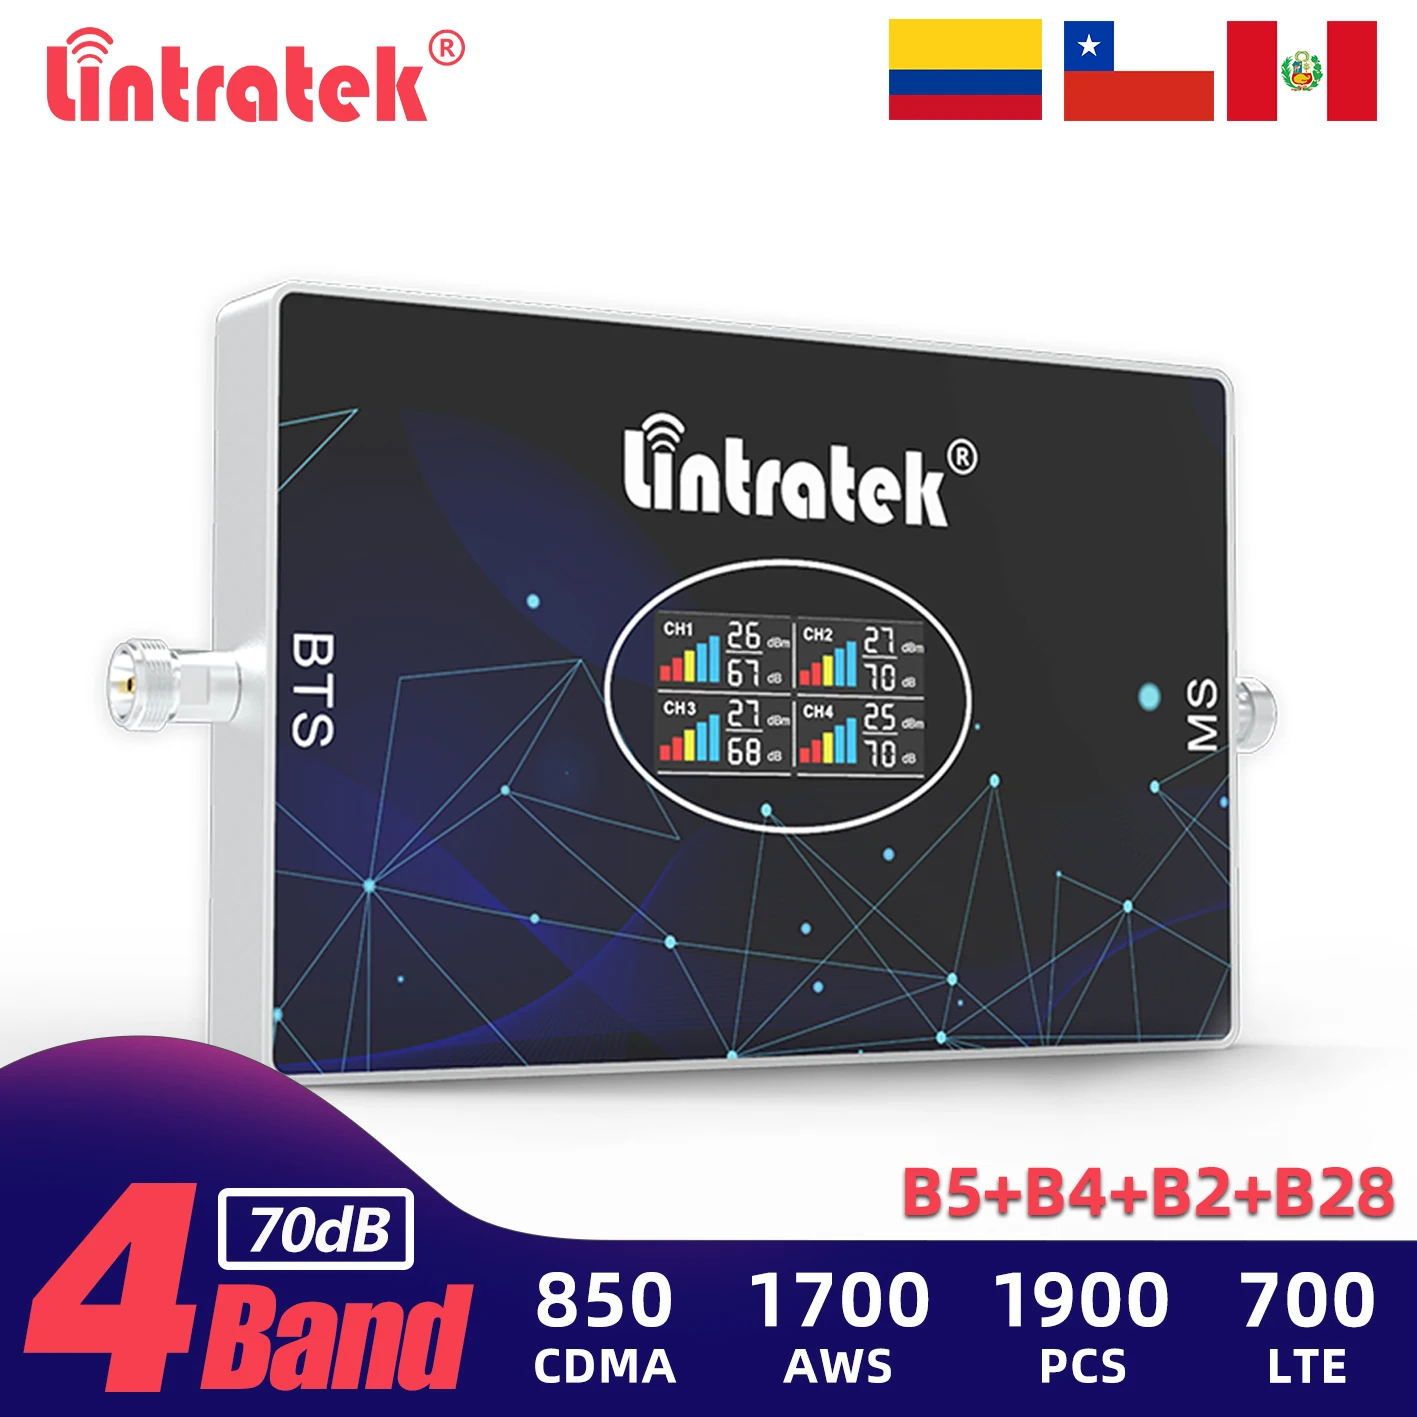 Lintratek Four-Band Signal Repeater 850 700 1900 1700 Band 28 Cellular Booster 2G GSM 3G 4G LTE Cell Phone Network Amplifier easyboost 850 1900 aws1700mhz 2g 3g 4g repeater tri band signal booster b2 b4 b5 digital lcd full kit coverage up to 800m2